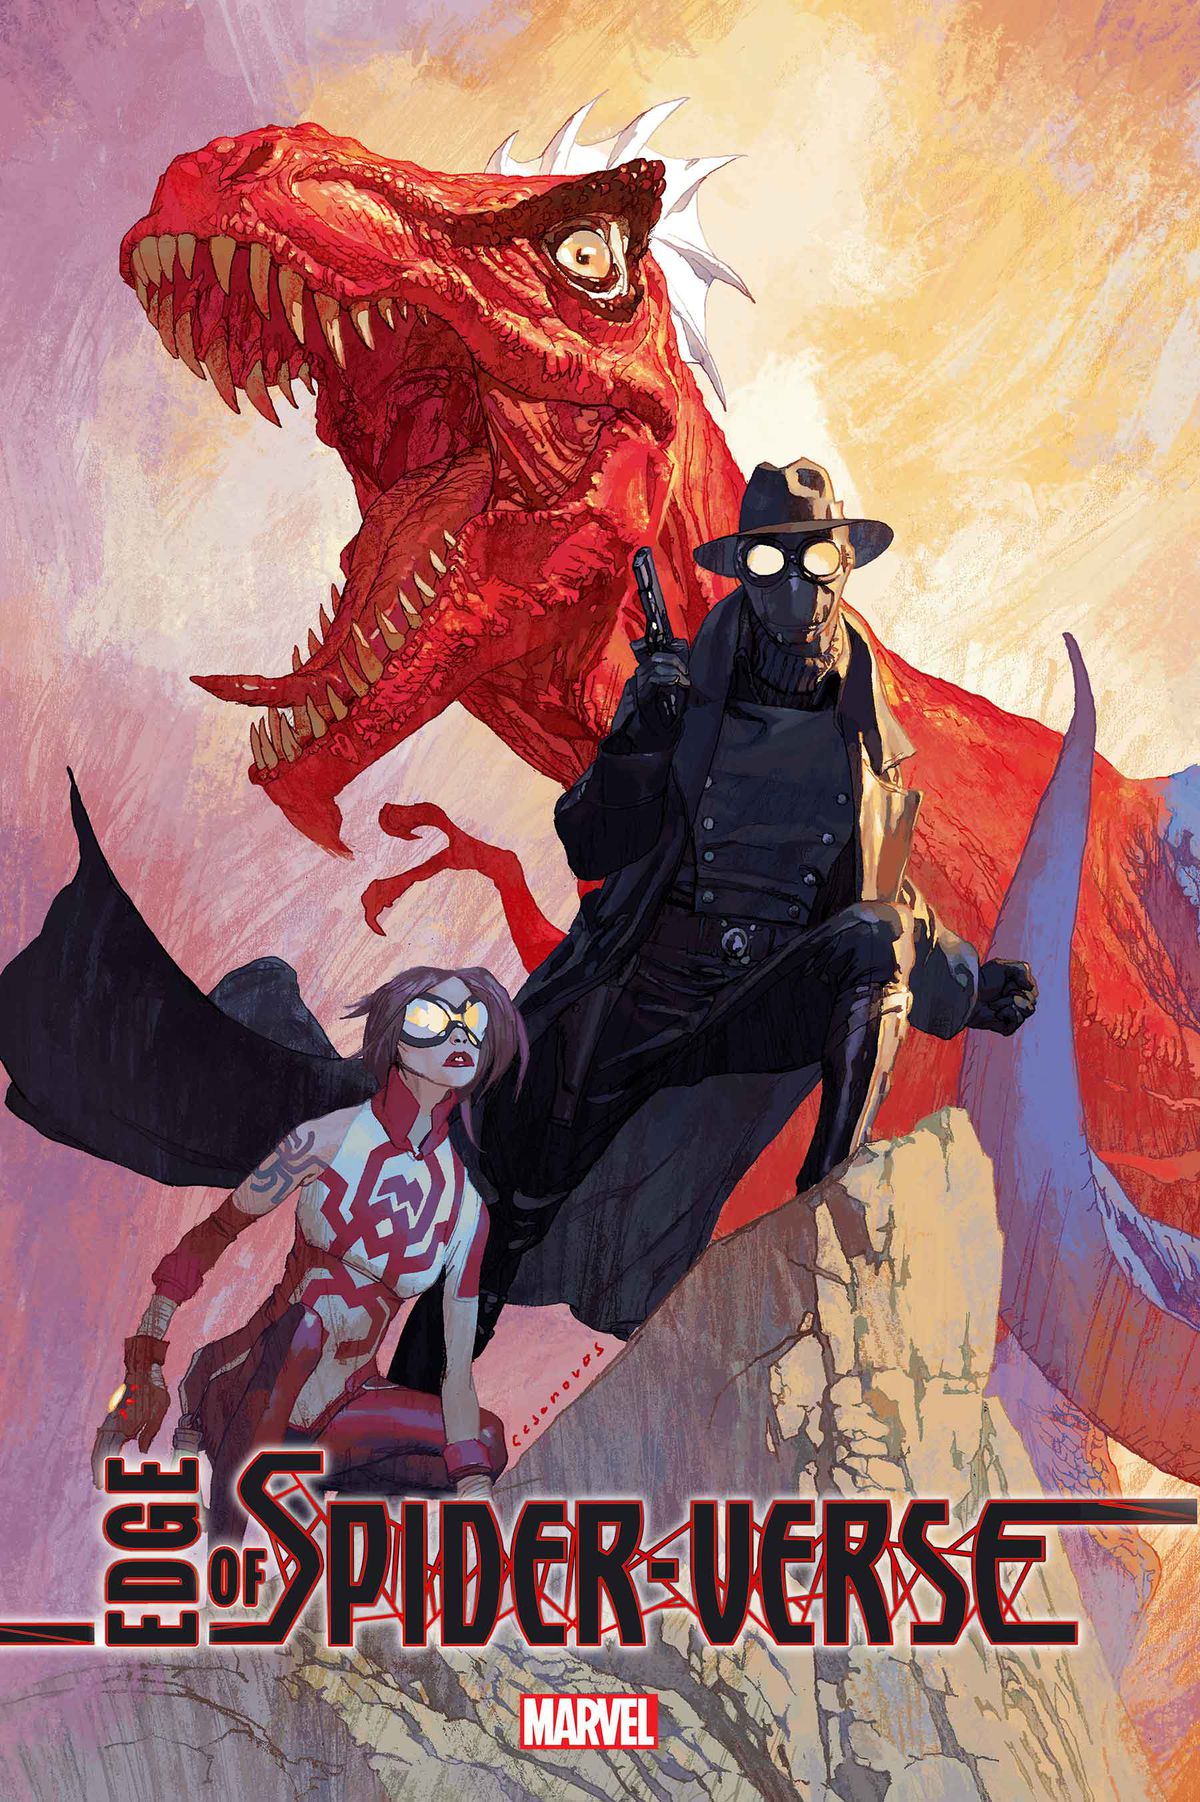 Araña, Spider-Man Noir, and Spider-Rex (a T. Rex with the colors of Spider-Man) on the cover of Edge of Spider-Verse #1 (2022).